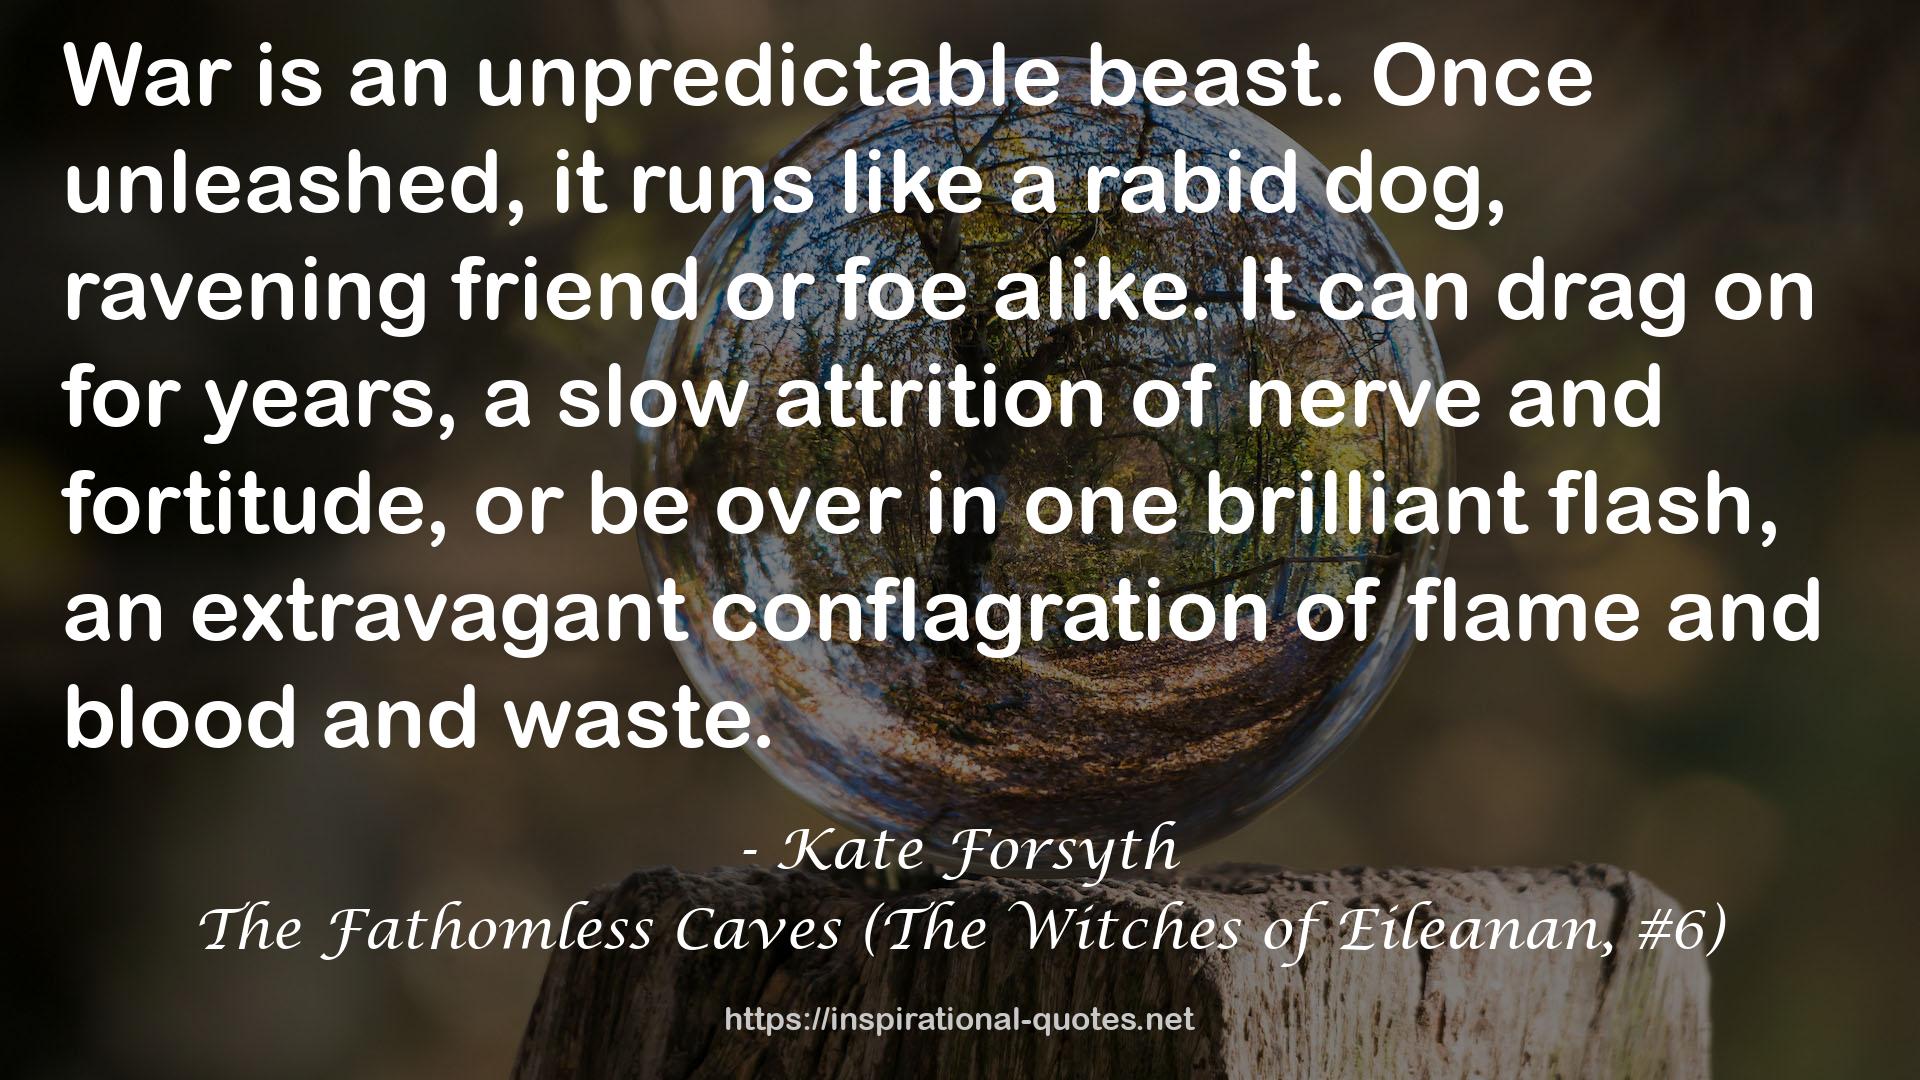 The Fathomless Caves (The Witches of Eileanan, #6) QUOTES